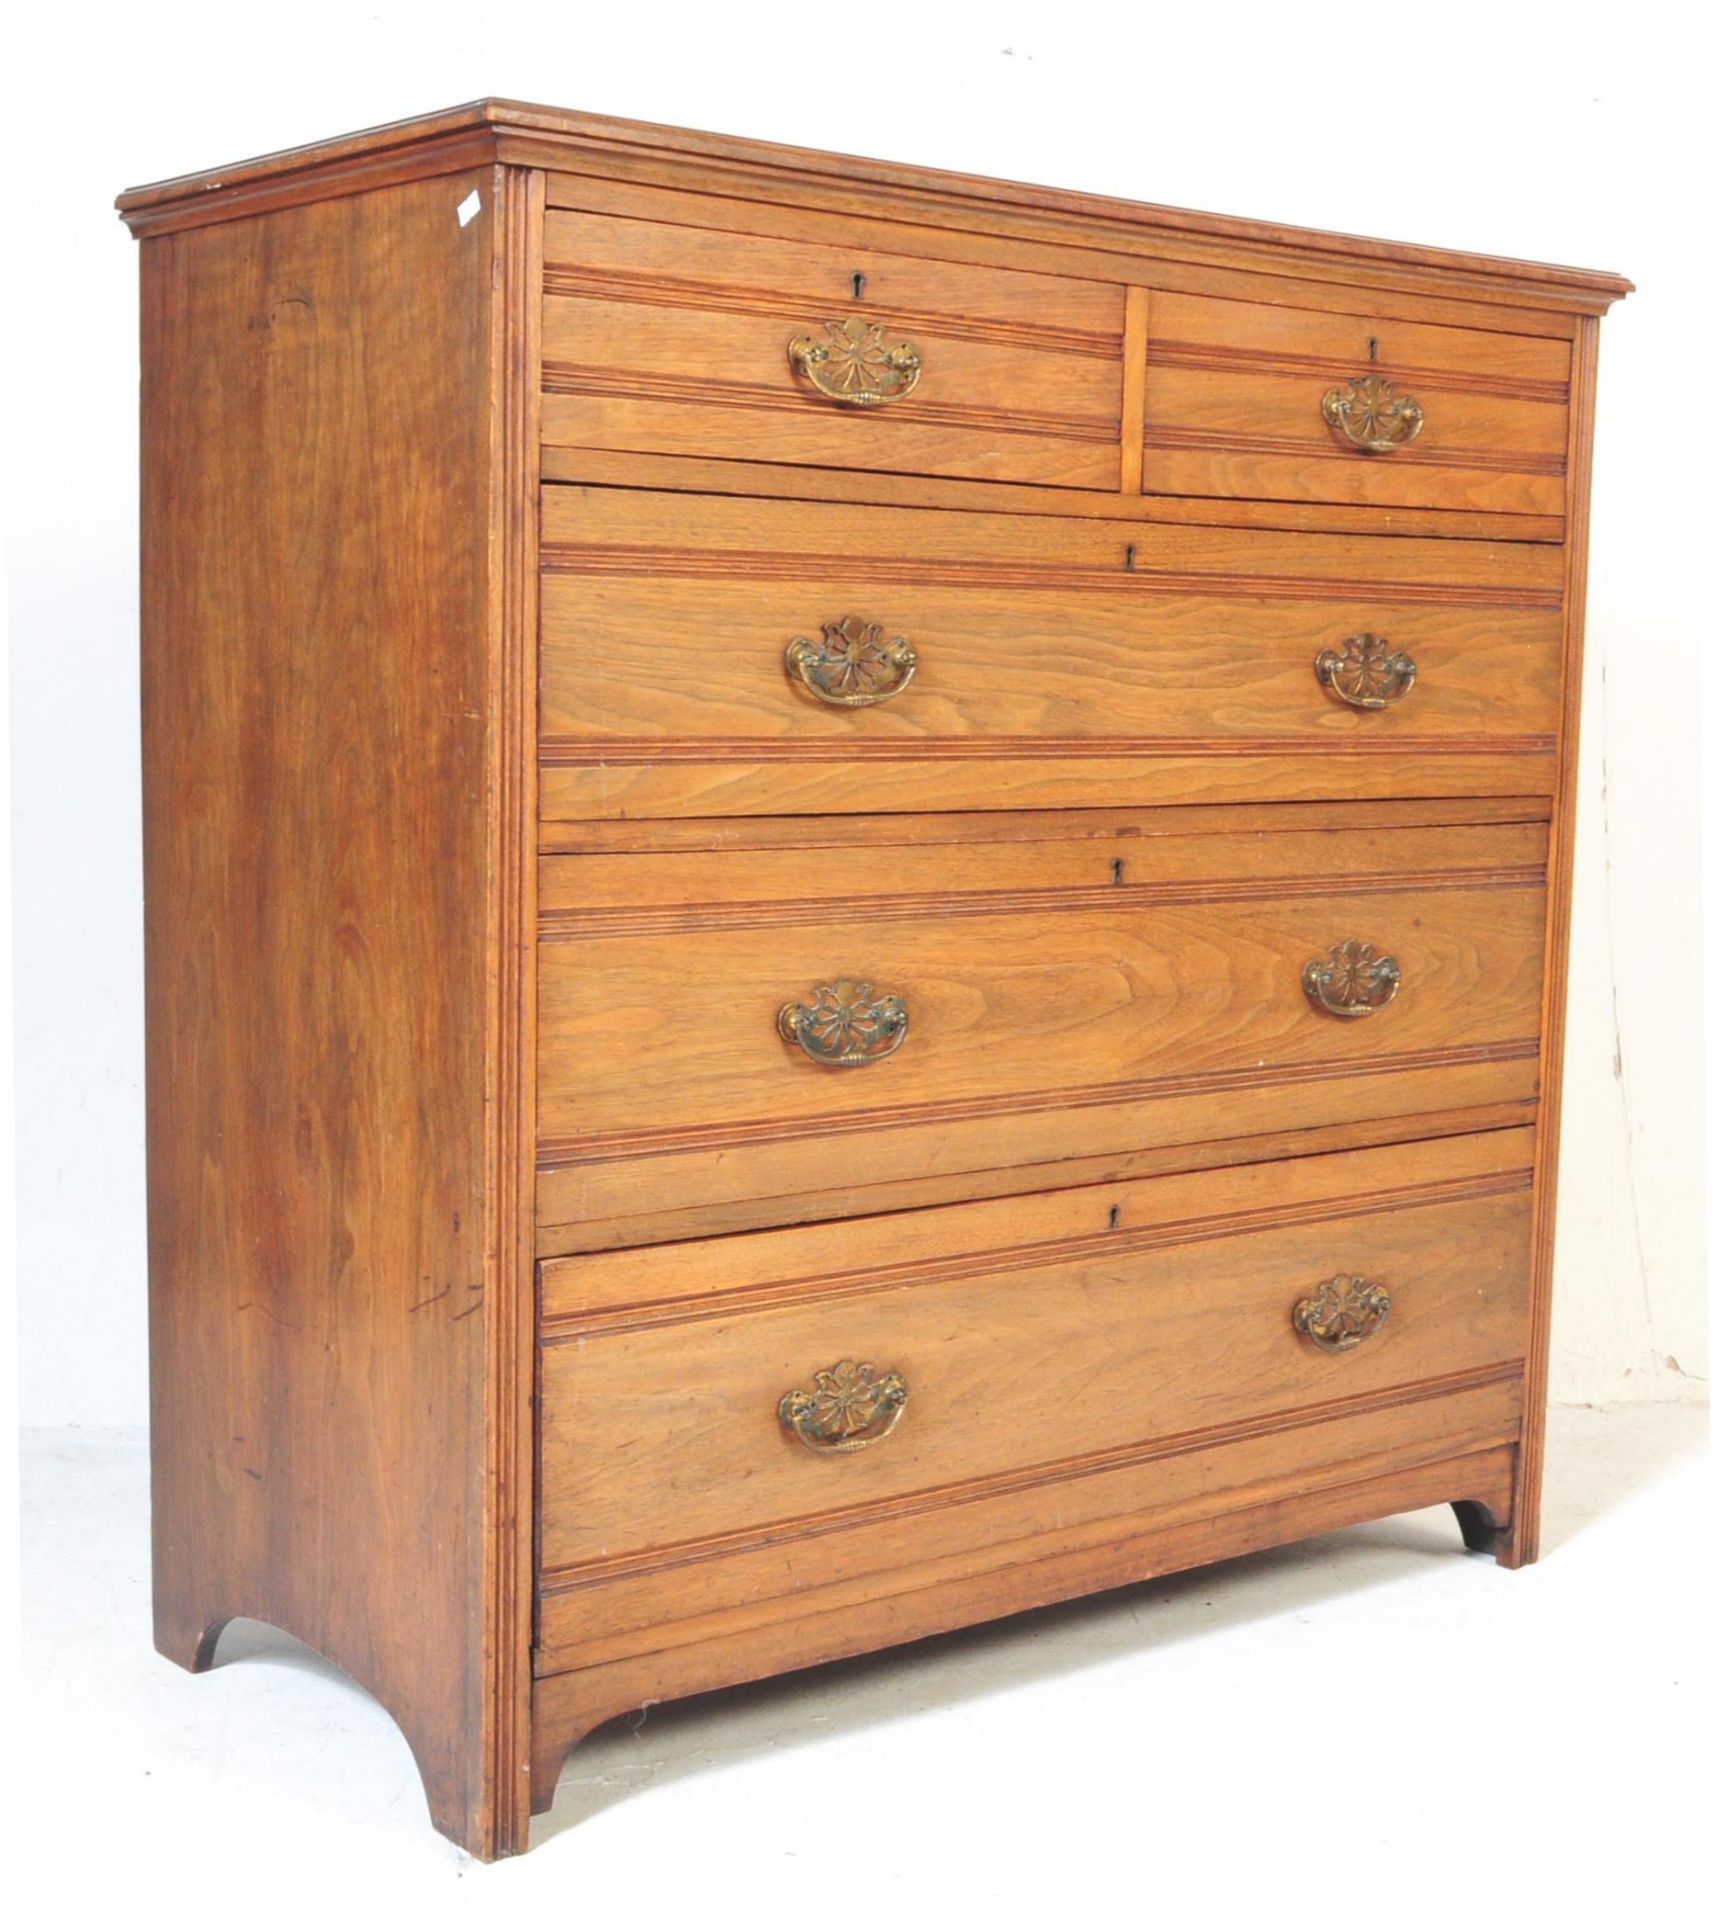 A 19TH CENTURY EDWARDIAN MAHOGANY CHEST OF DRAWERS